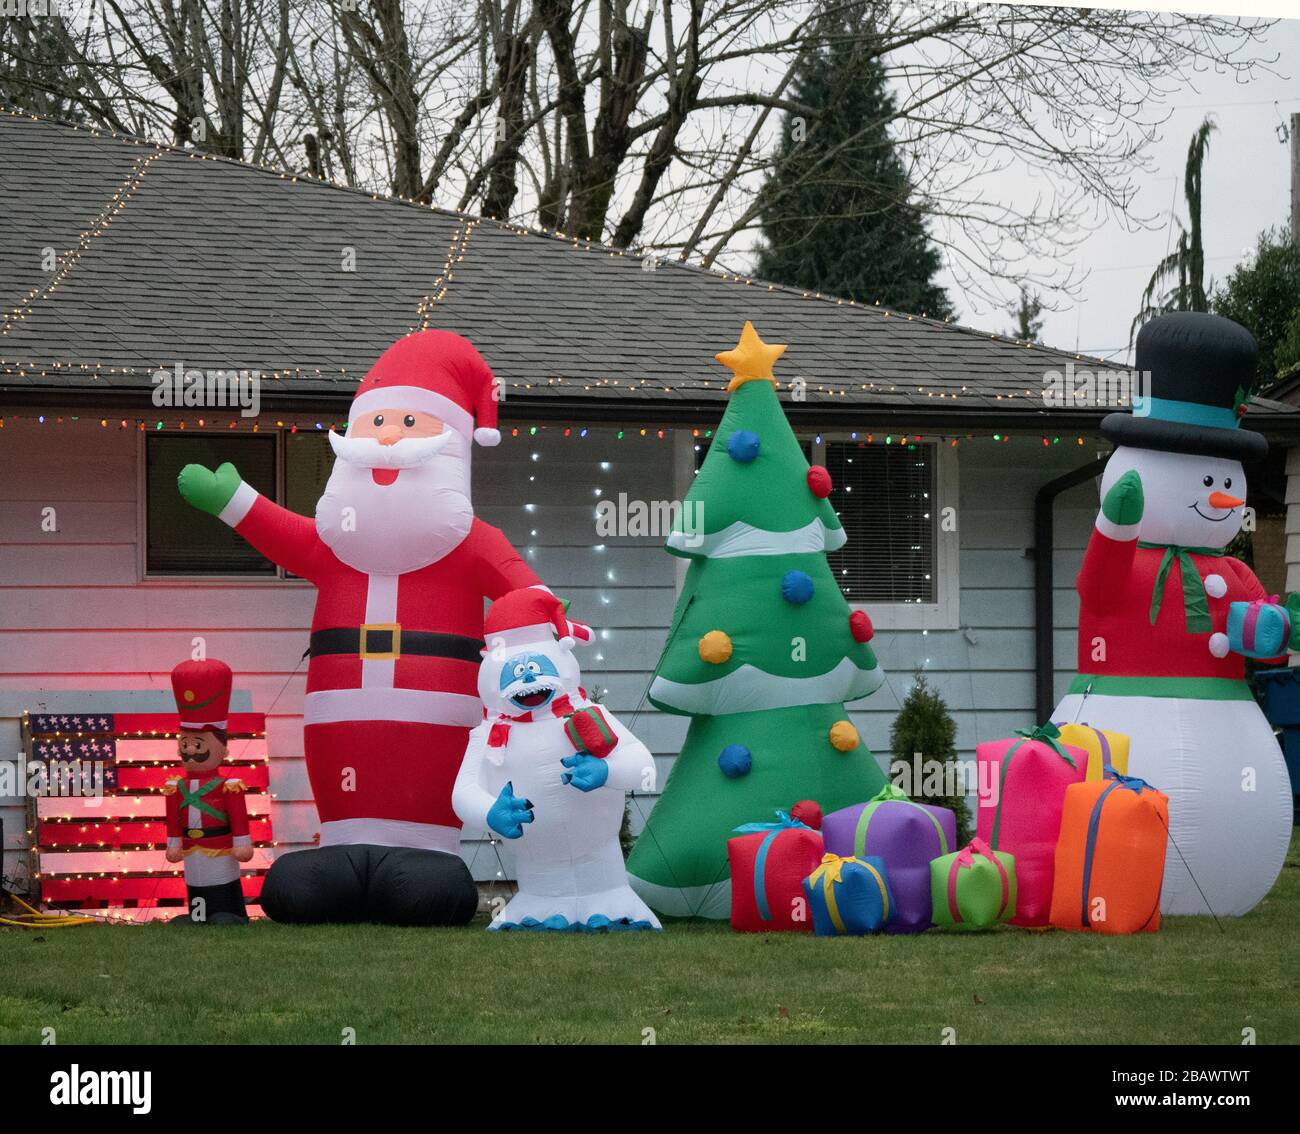 Blowup Christmas characters on a lawn. Stock Photo